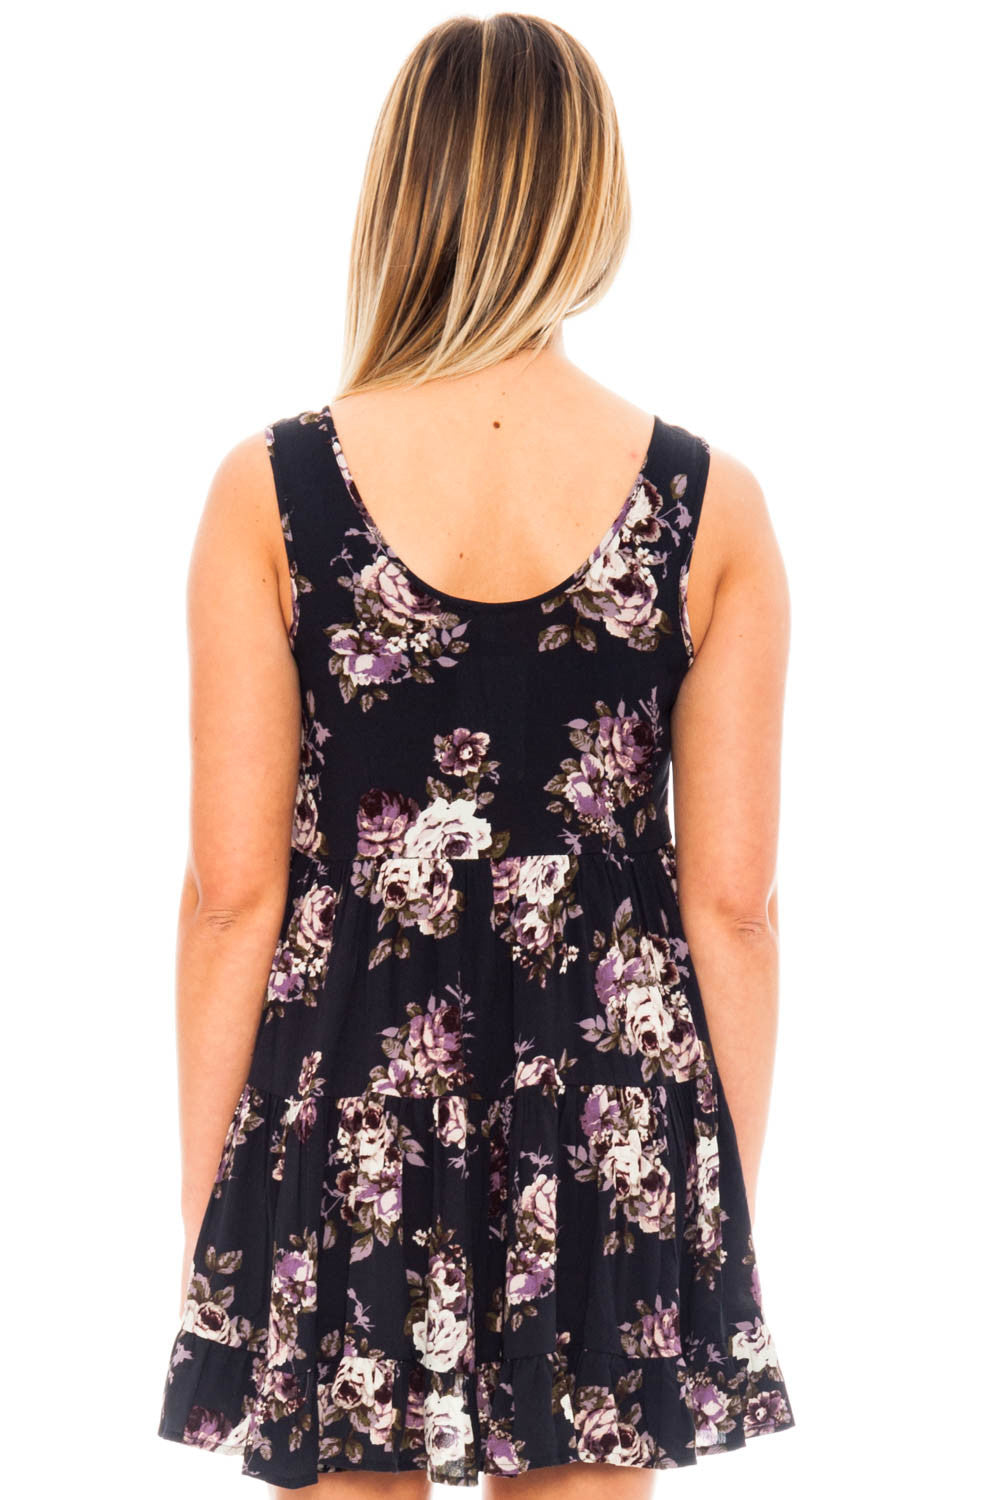 Dress - Floral with neckline lace-up detail